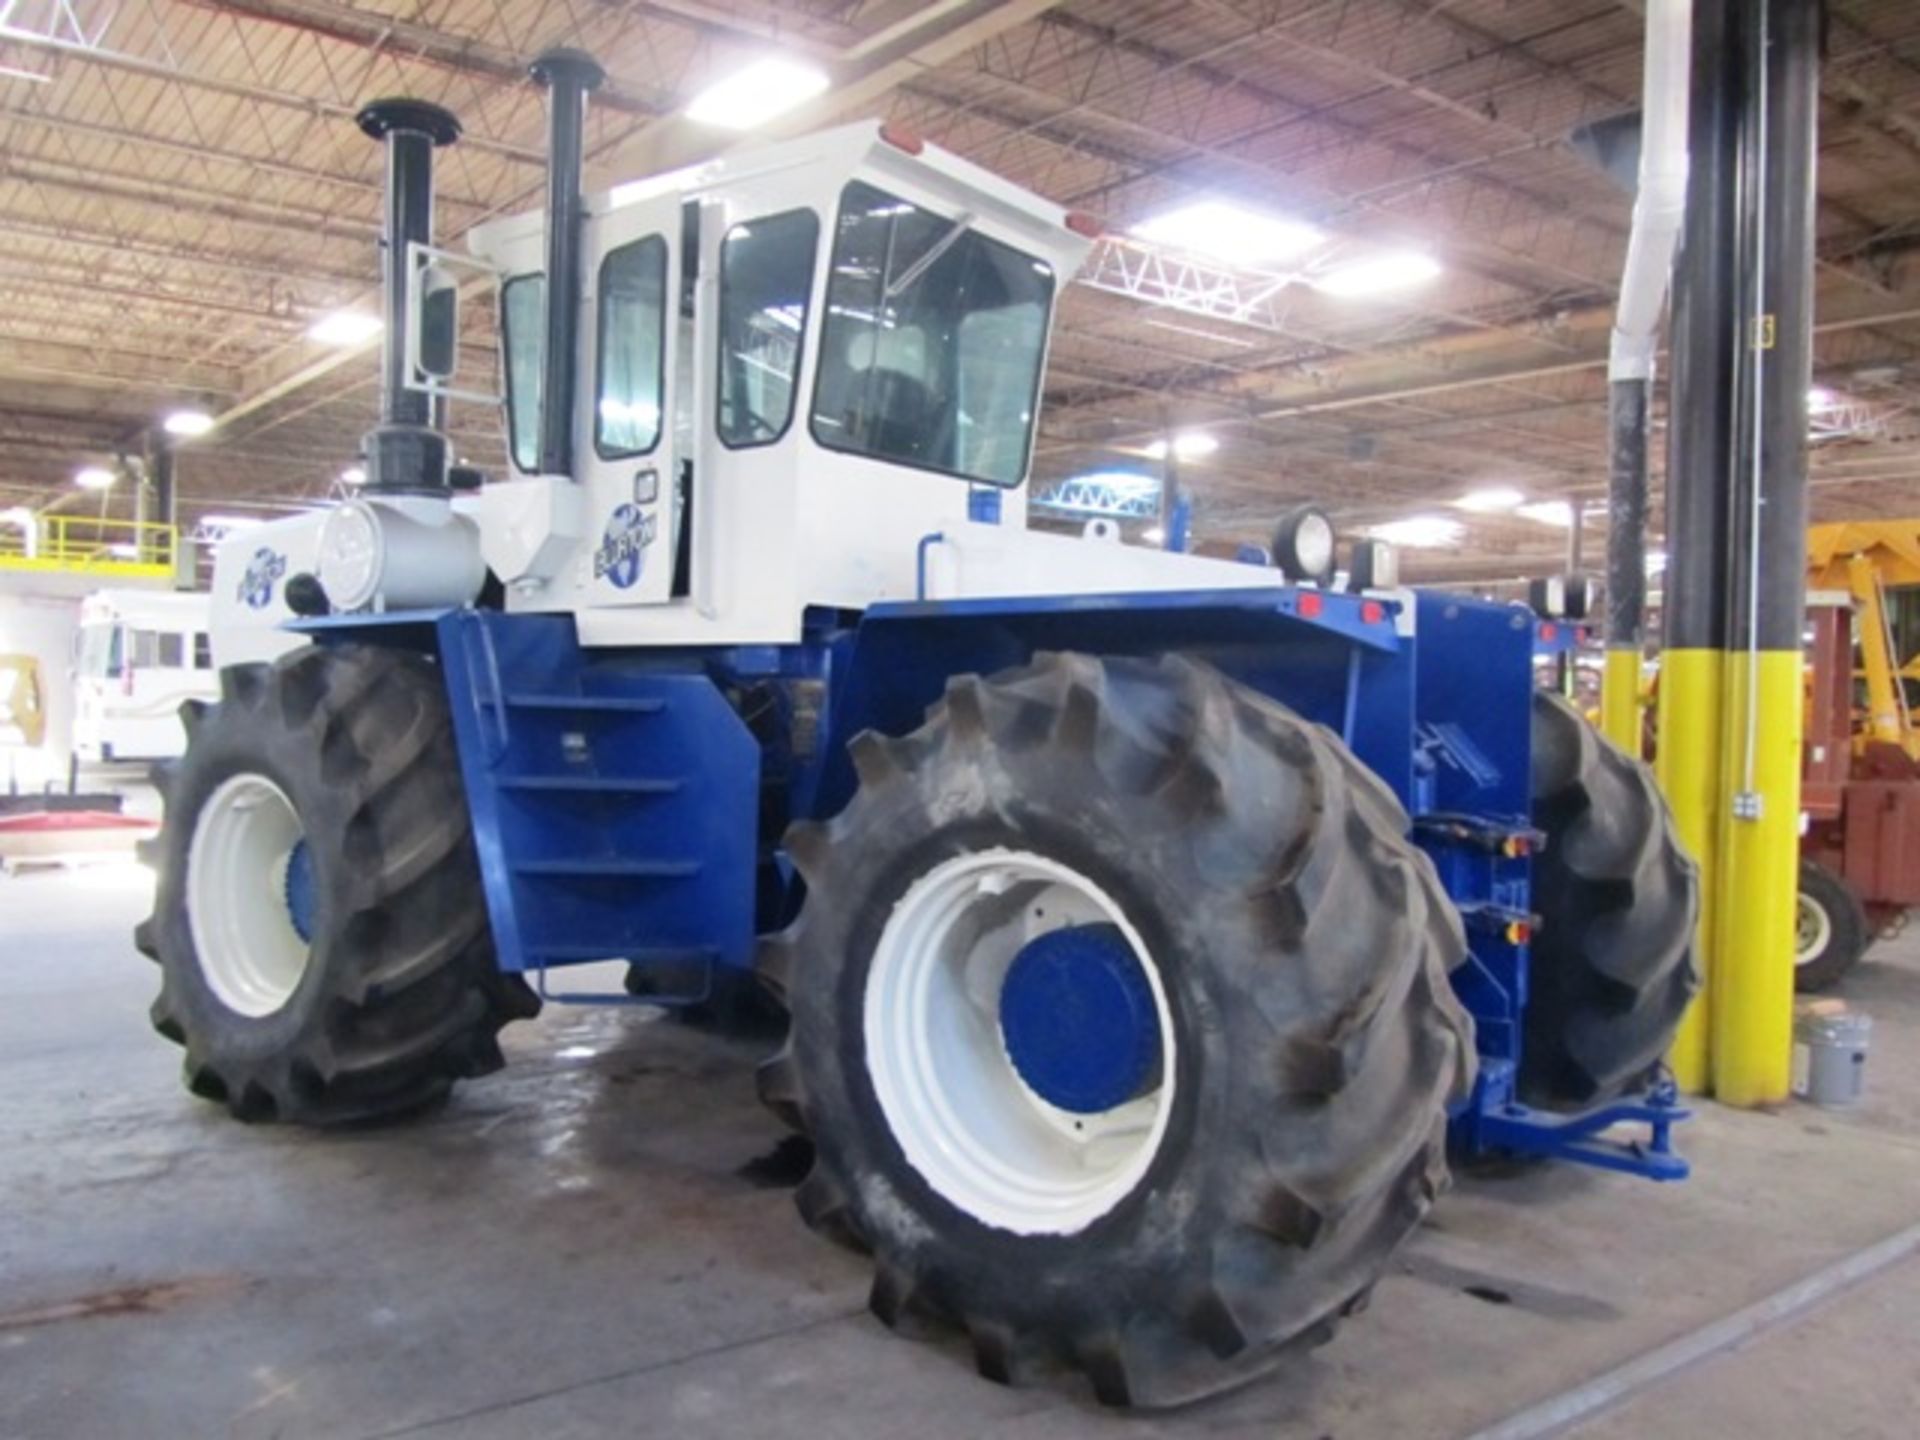 Ford PC311H Rough Terrain Tractor with Articulated Steering, Enclosed Cab, PTO in Rear, Diesel, - Image 4 of 4